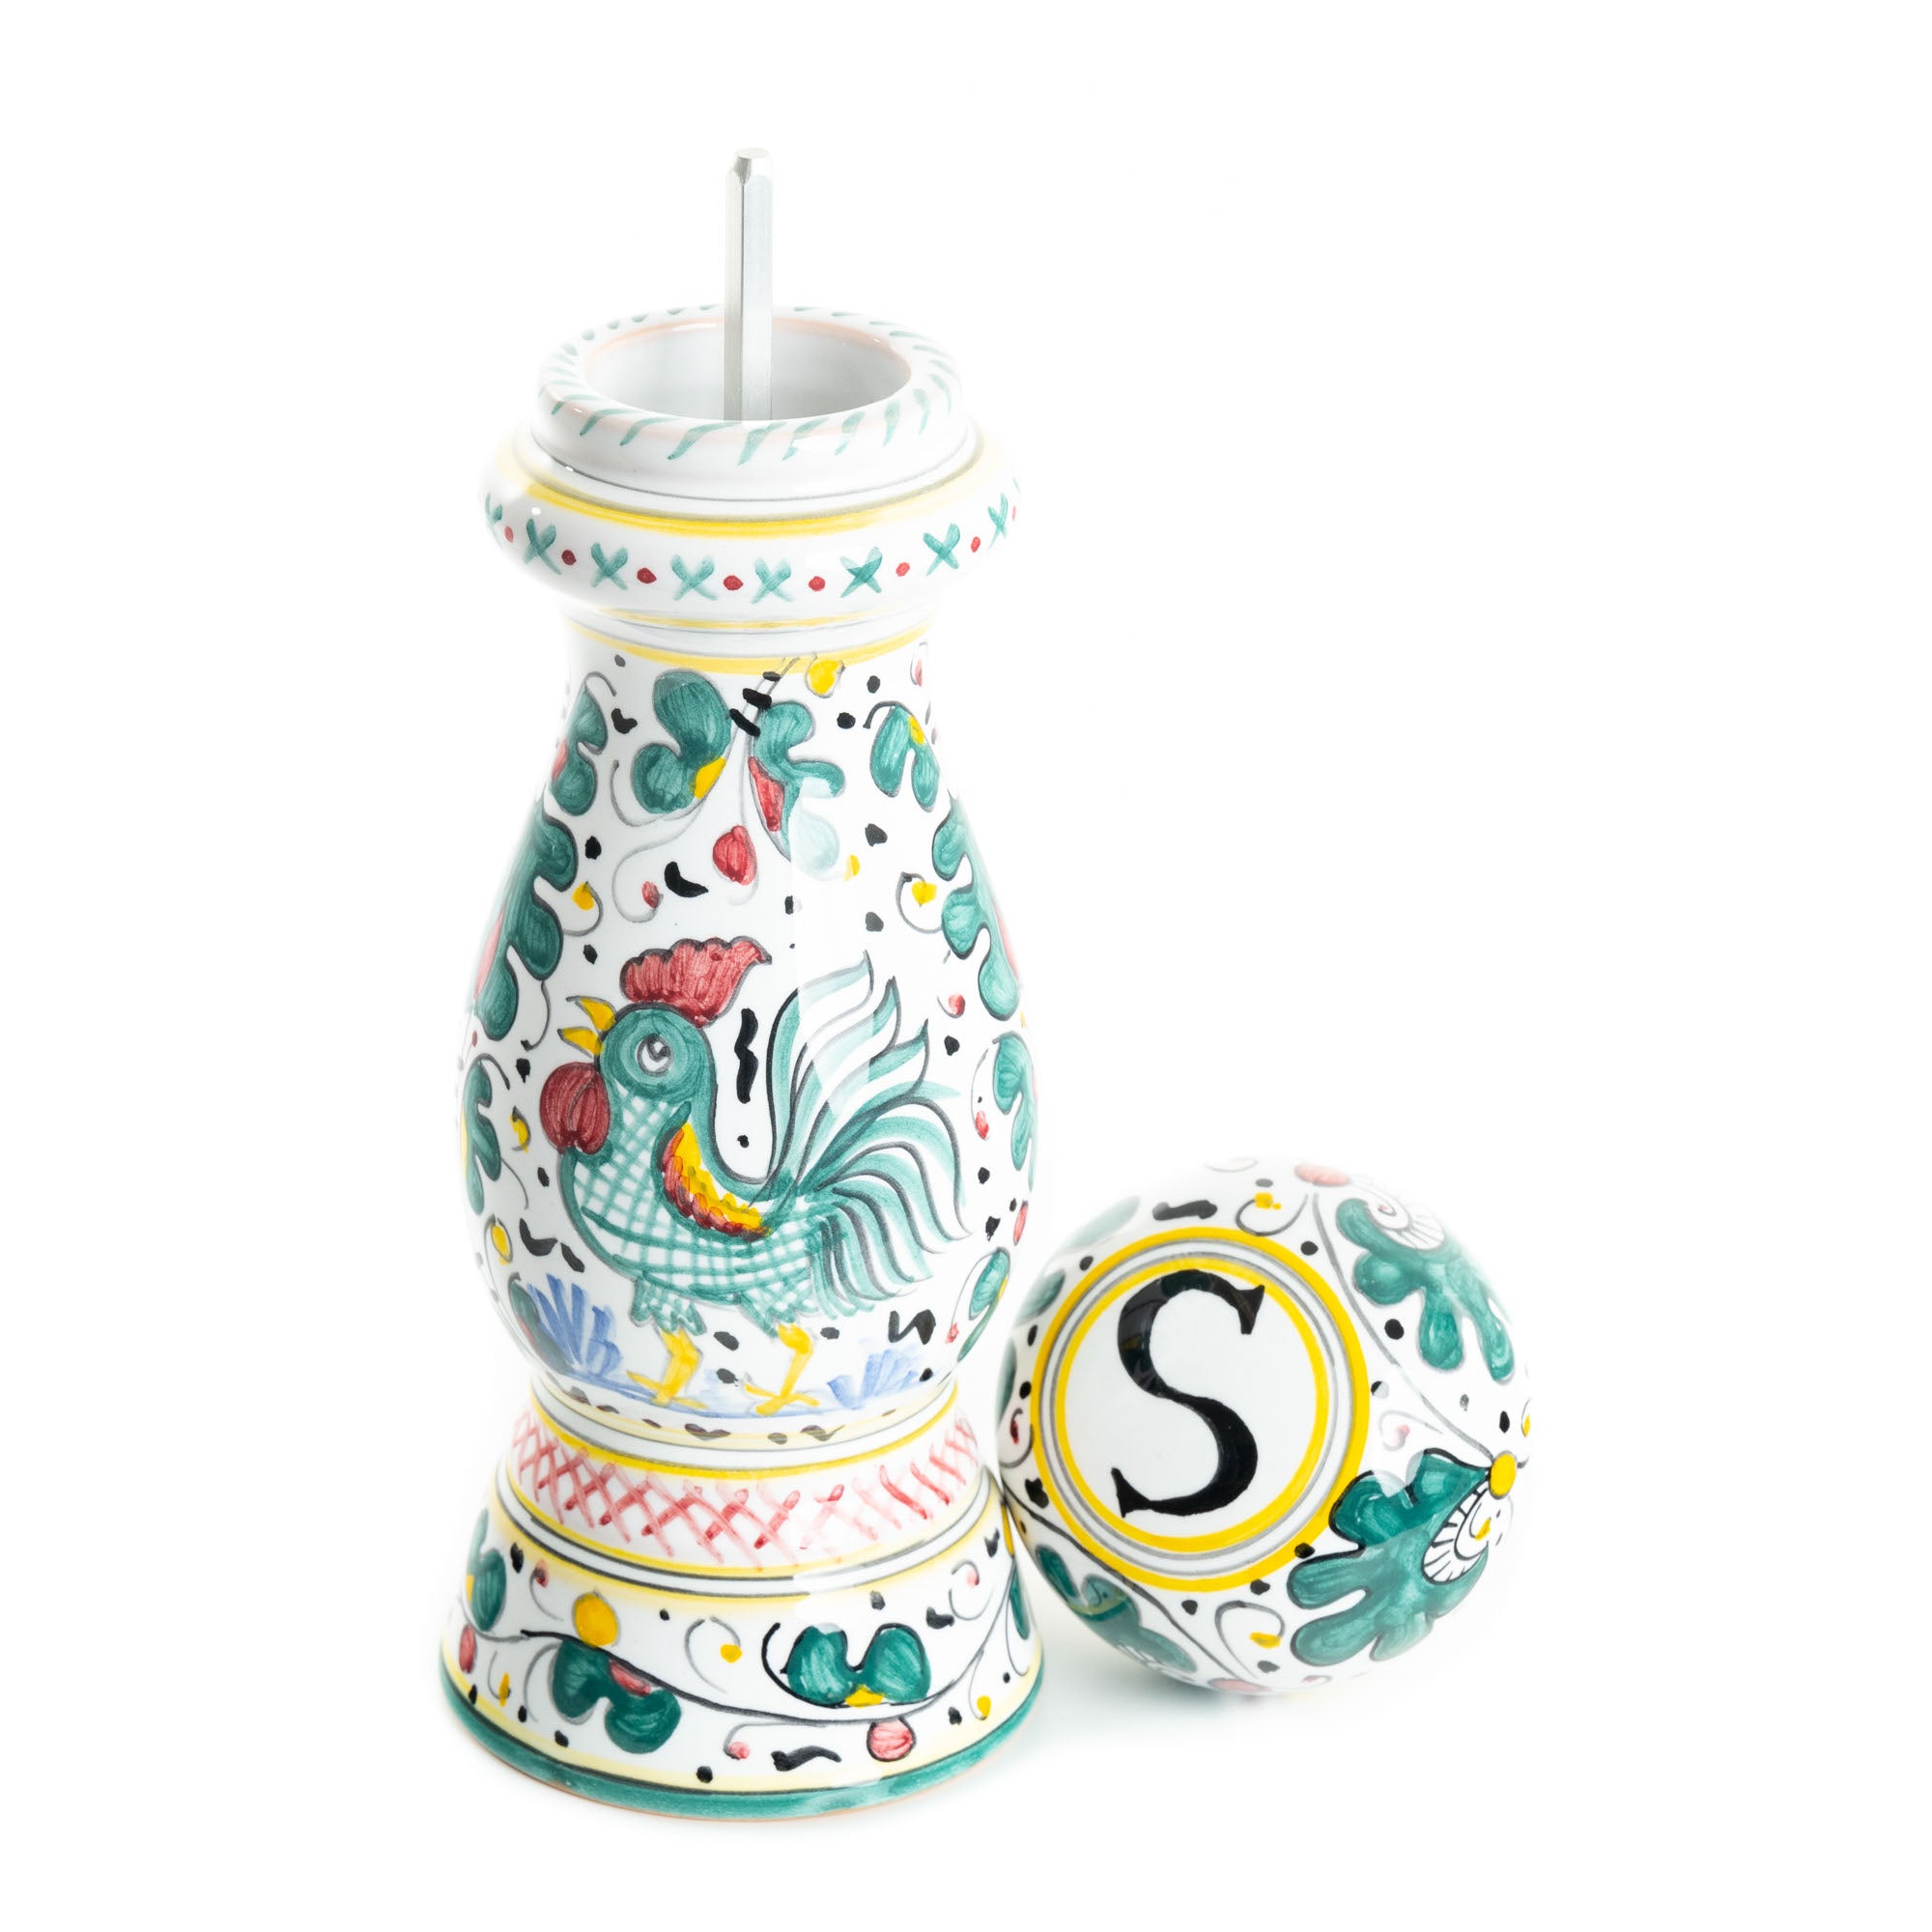 Orvieto - Salt & Pepper Grinder Set, ceramics, pottery, italian design, majolica, handmade, handcrafted, handpainted, home decor, kitchen art, home goods, deruta, majolica, Artisan, treasures, traditional art, modern art, gift ideas, style, SF, shop small business, artists, shop online, landmark store, legacy, one of a kind, limited edition, gift guide, gift shop, retail shop, decorations, shopping, italy, home staging, home decorating, home interiors